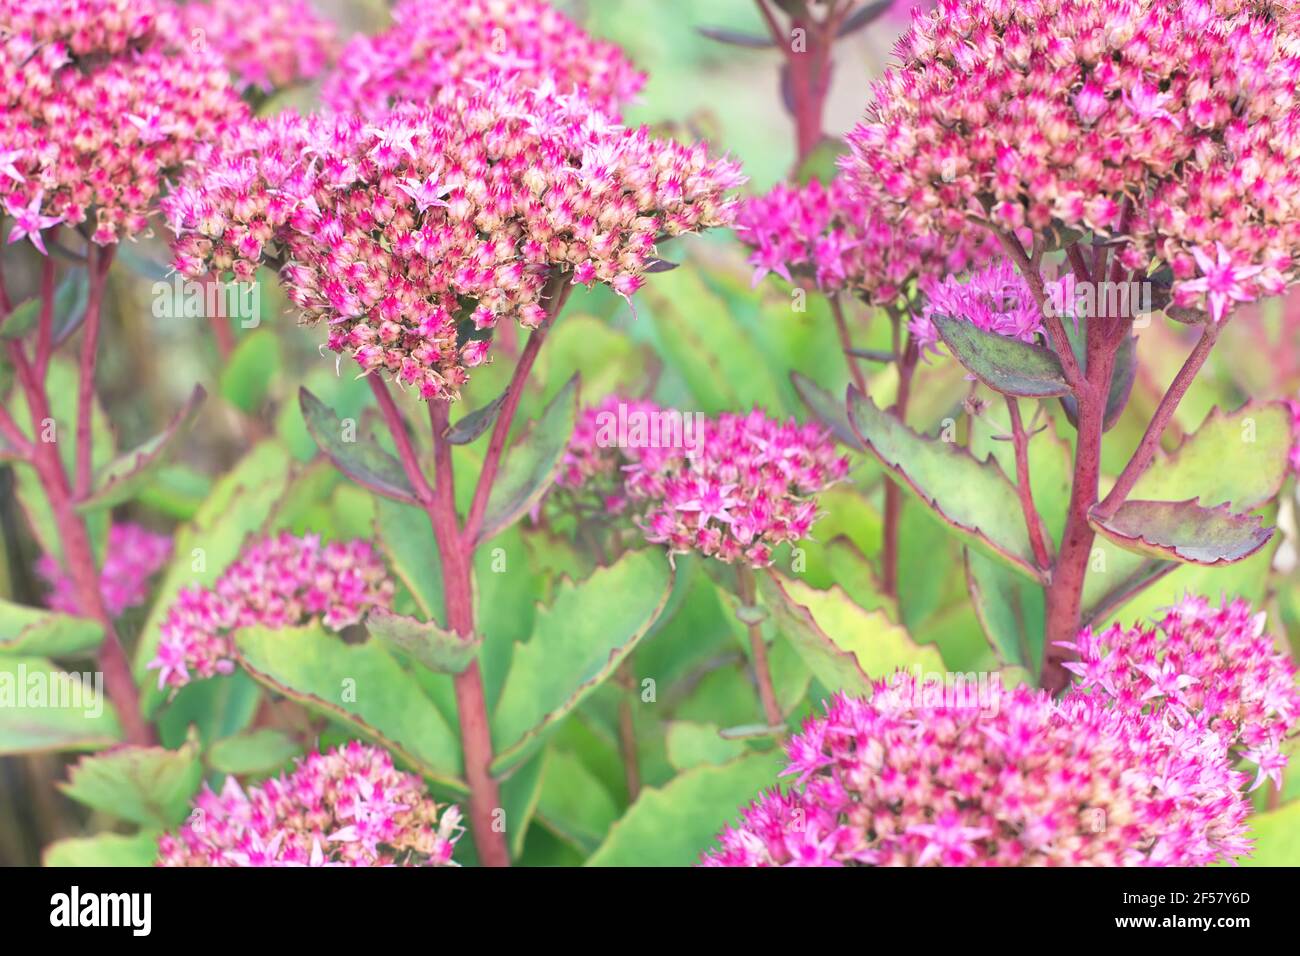 Succulents with bright pink flowers. Hylotelephium telephium (orpine,livelong,life-everlasting,witch's moneybags) in bloom. Flowering succulett plants Stock Photo